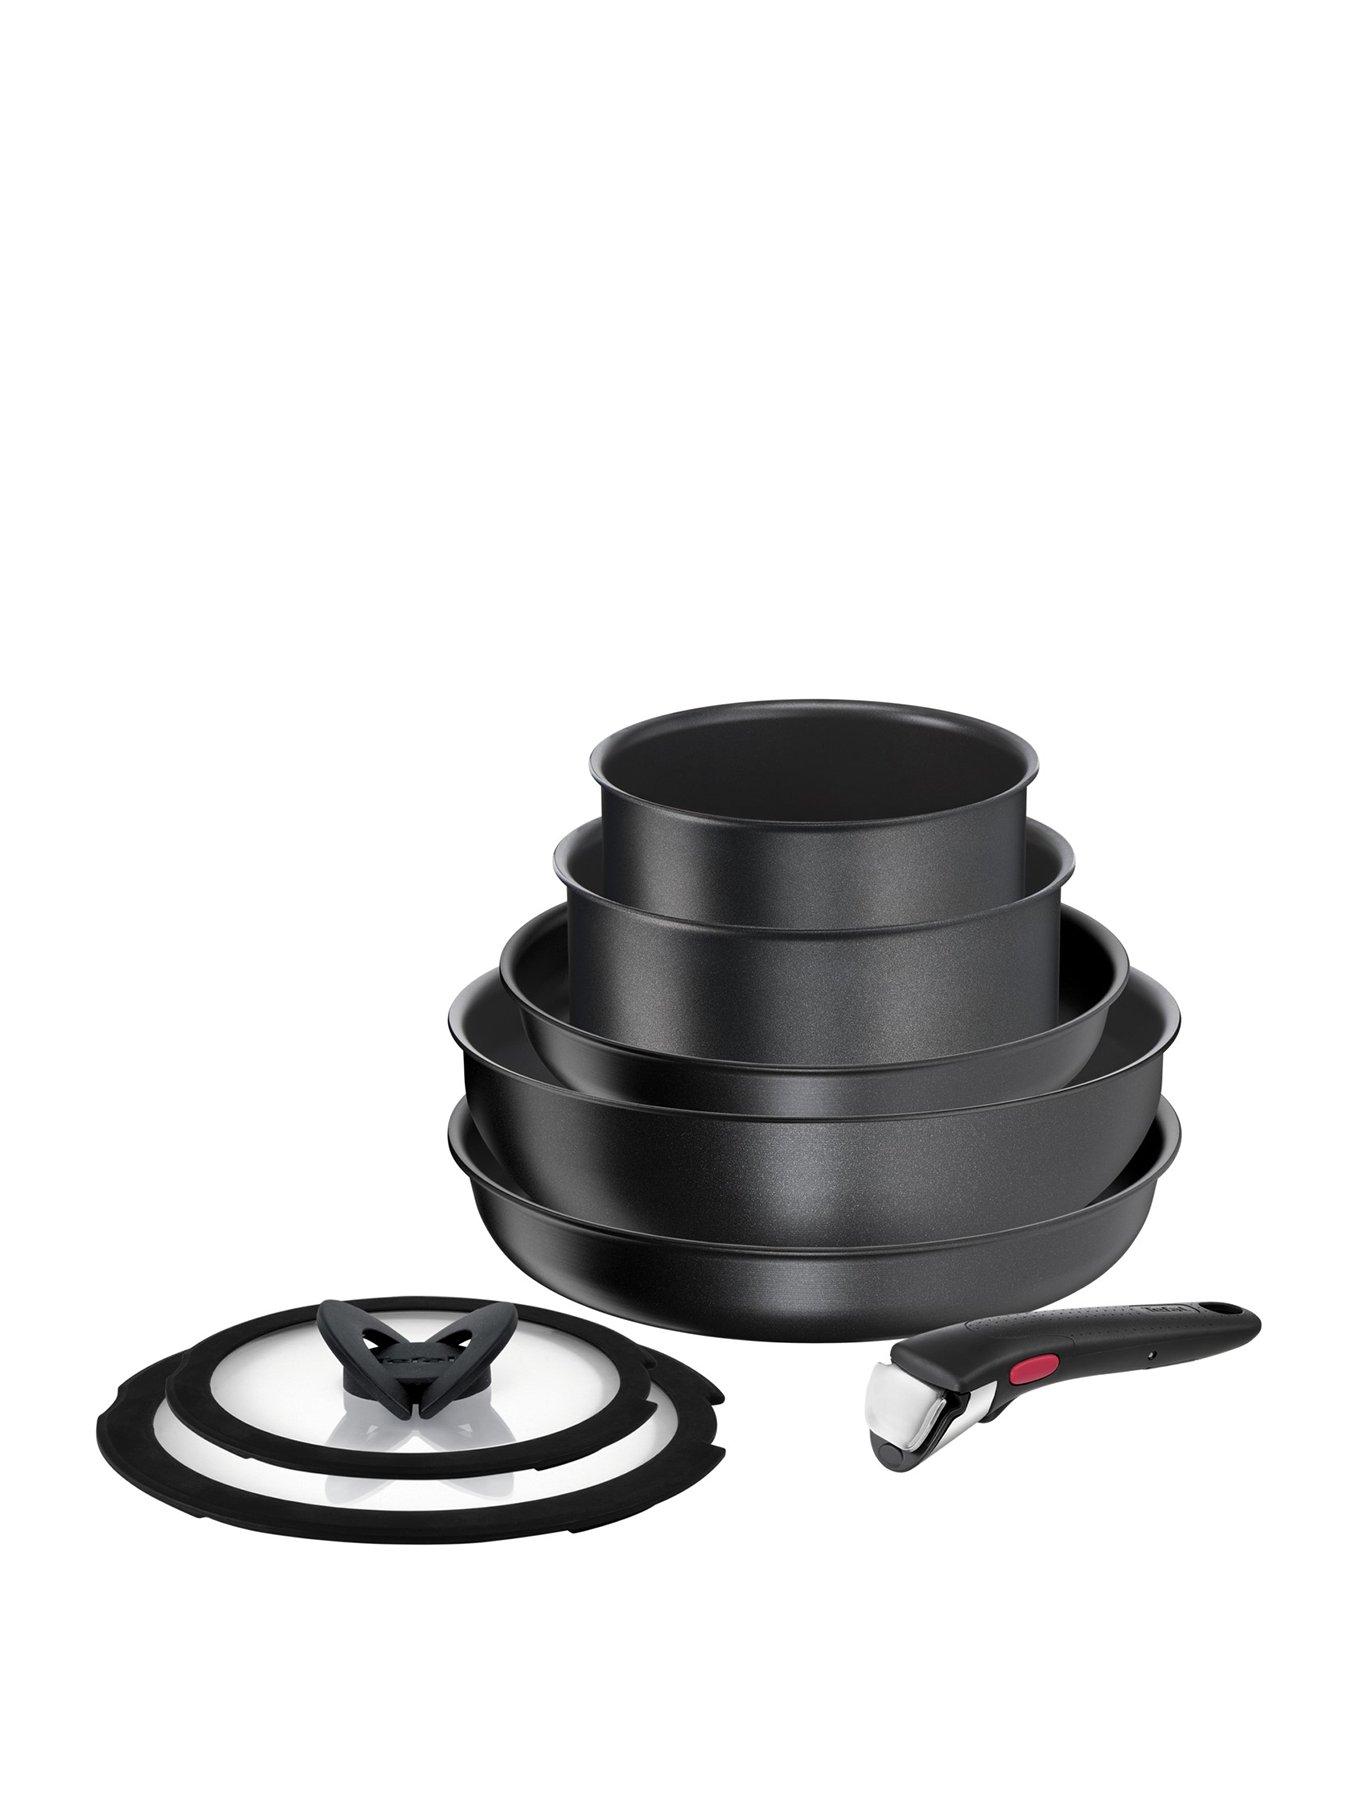 Tefal 3 Piece Ingenio Easy Cook & Clean Try Me Set